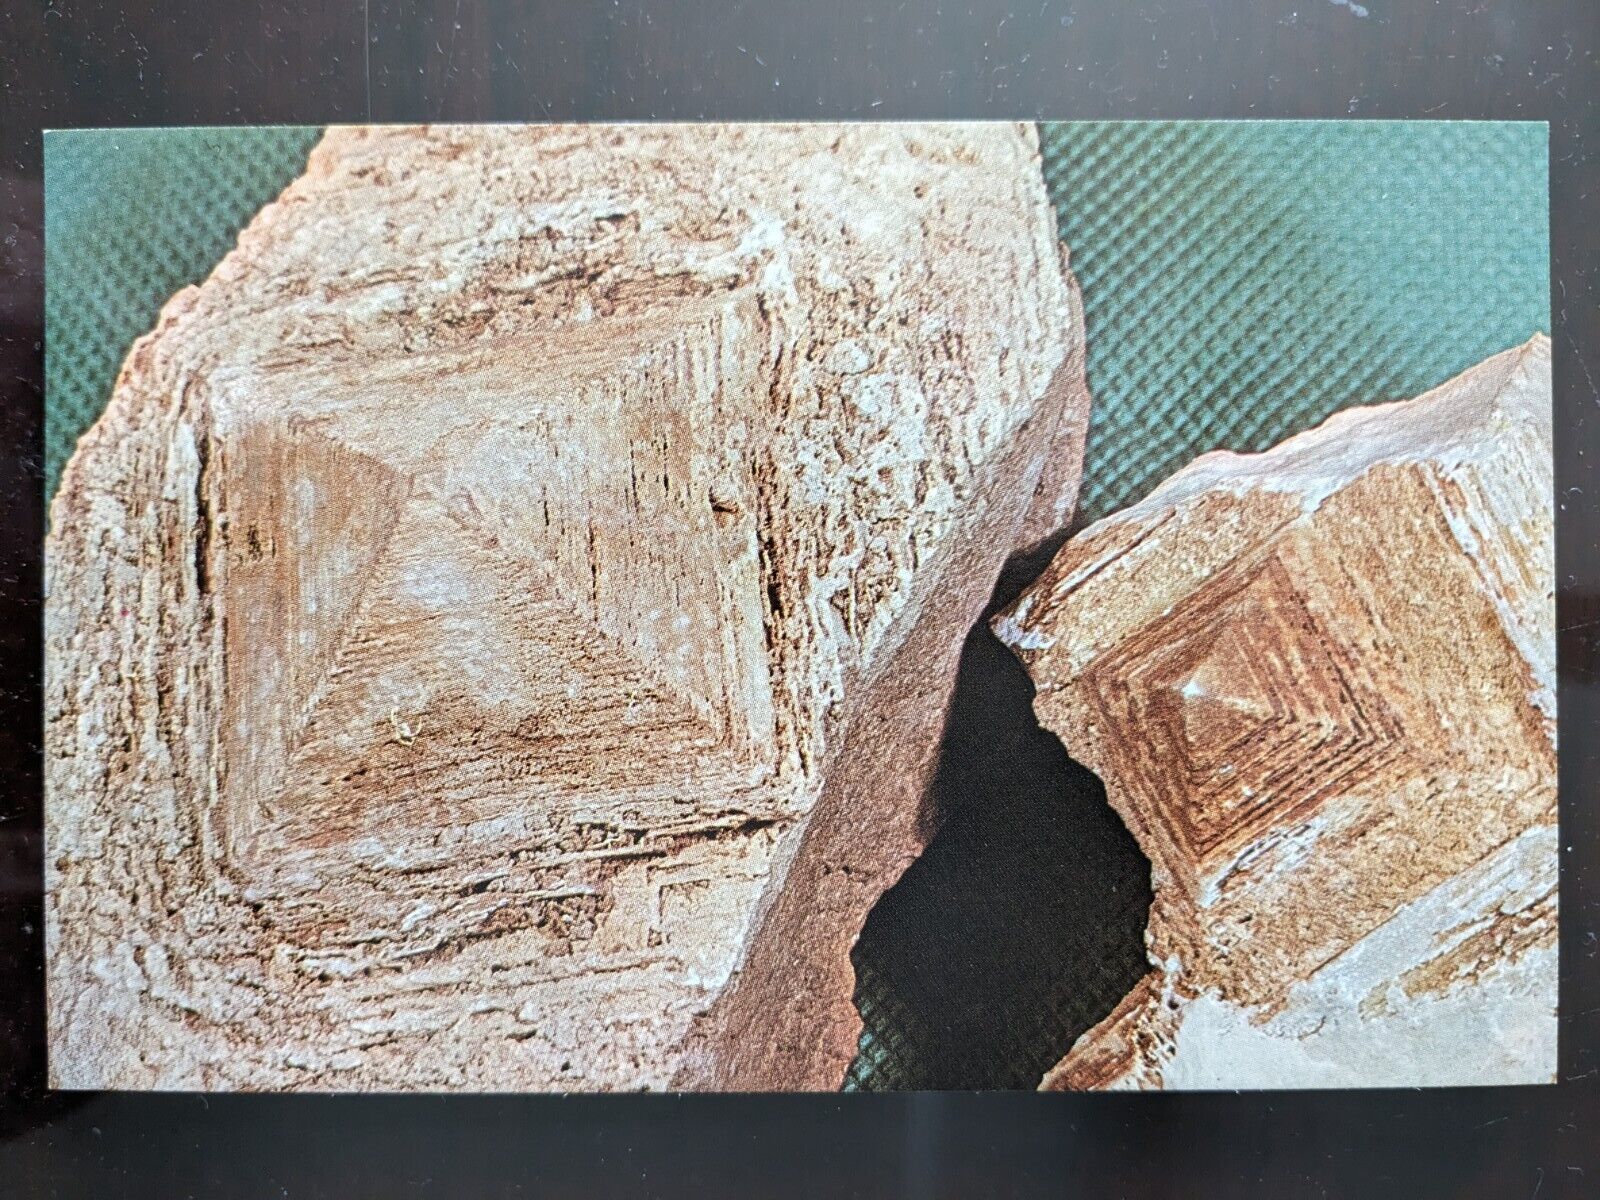 Dolomite Pyramids, Found Only In Major County, OK - Mid-Later 1900s, Rough Edges